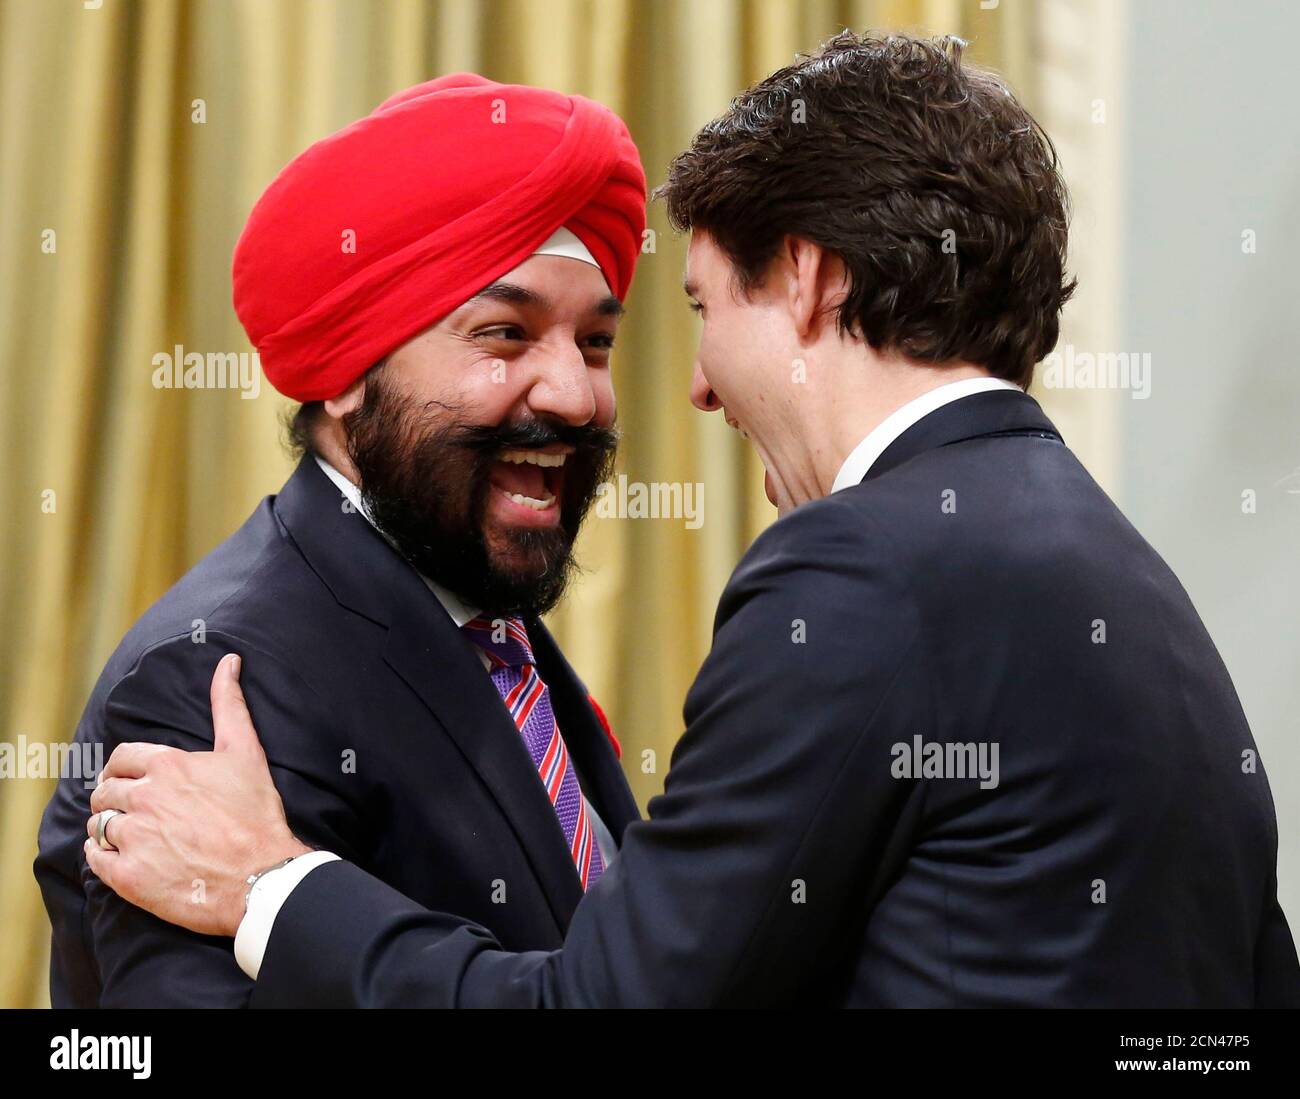 Canada's new Innovation, Science and Economic Development Minister Navdeep Bains (L) is congratulated by Prime Minister Justin Trudeau at Rideau Hall in Ottawa November 4, 2015. Morneau's expertise on pension reform will likely also be a significant asset to the newly sworn in Liberal Prime Minister Justin Trudeau, who promised during the election campaign to work with the provinces and businesses to enhance the national pension plan.   REUTERS/Chris Wattie Stock Photo